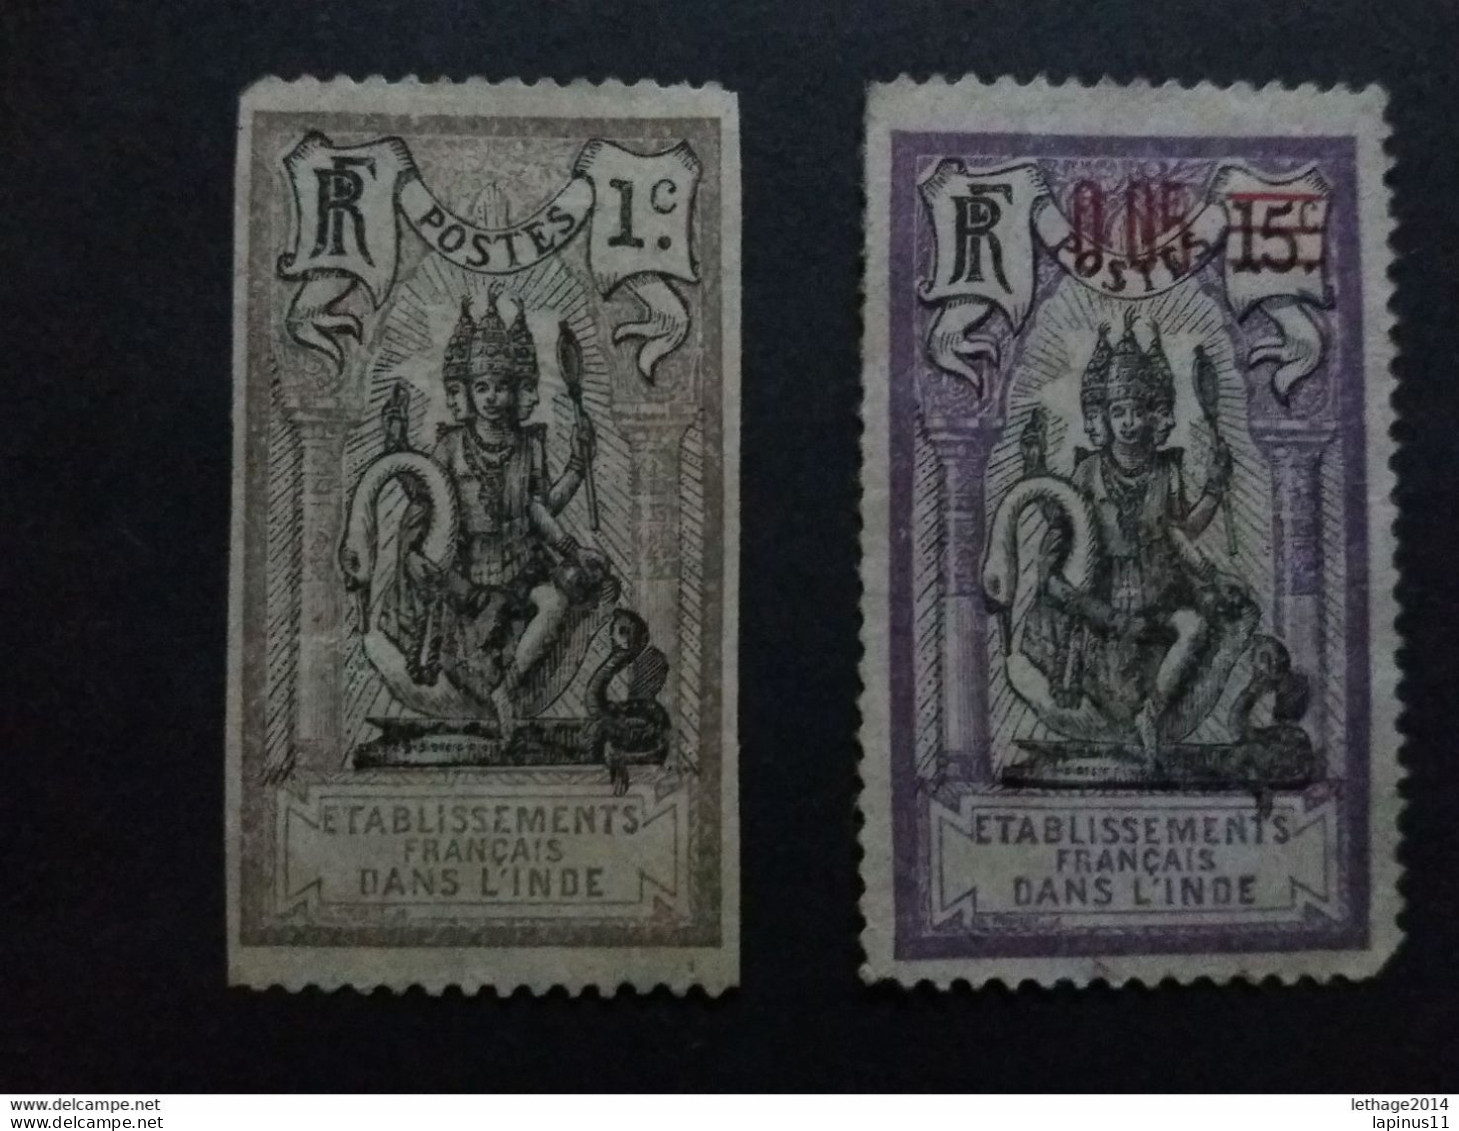 COLONIE FRANCIA ETABLISSEMENTS FRANCAISE INDE INDIA 1914 - 1923 TYPOGRAPHIES - Used Stamps